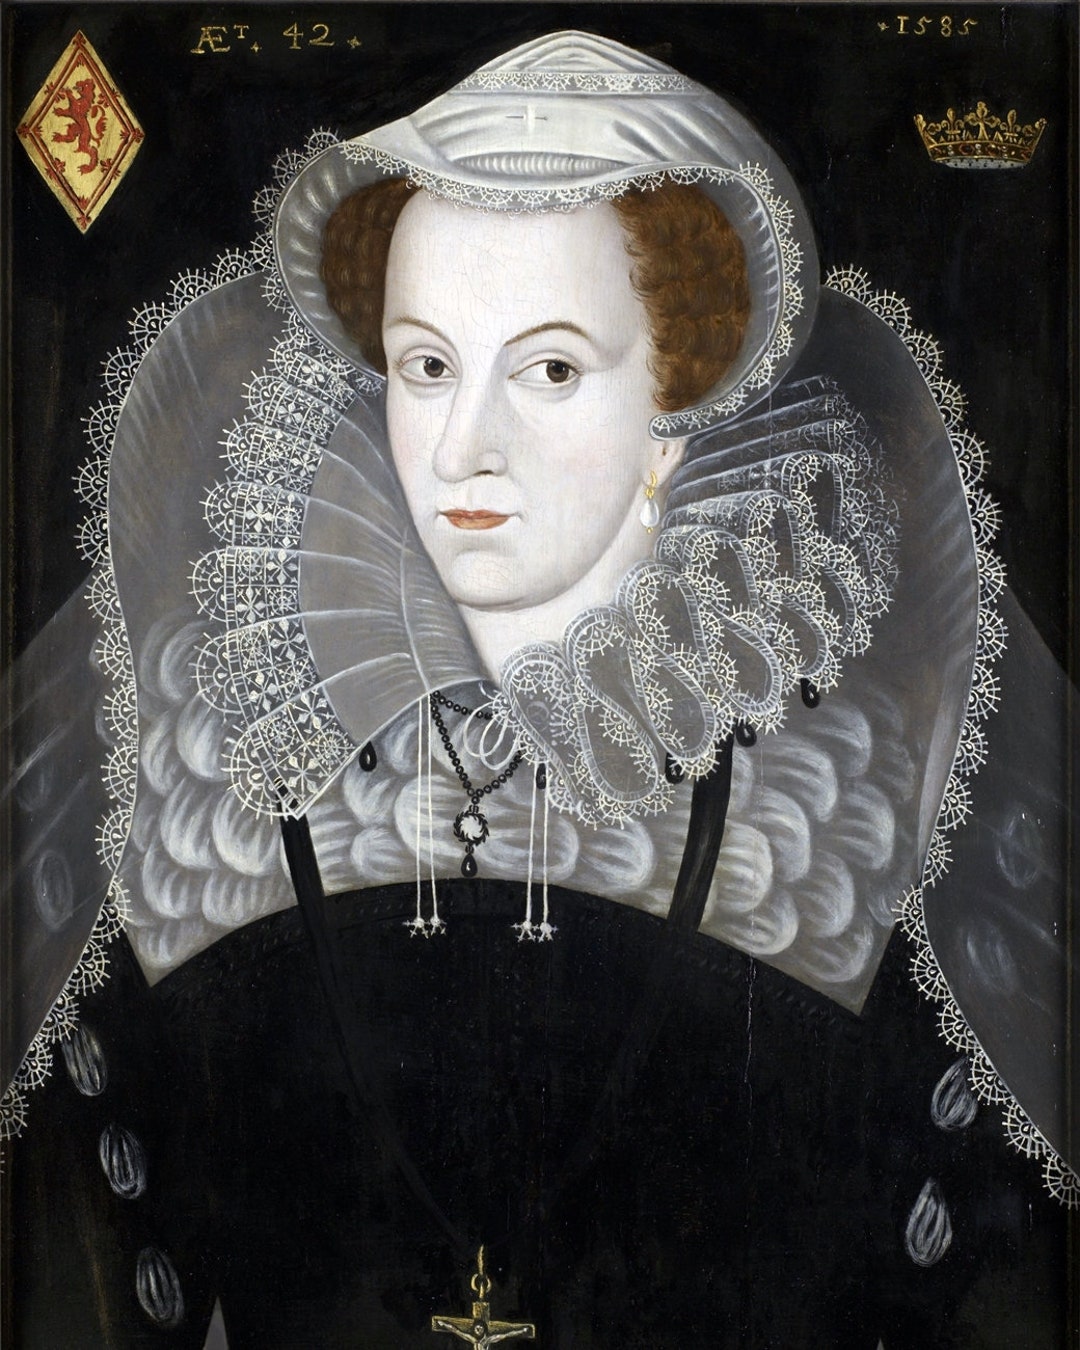 Historical Poster Print: Mary Queen of Scots Stuart Dynasty - Etsy